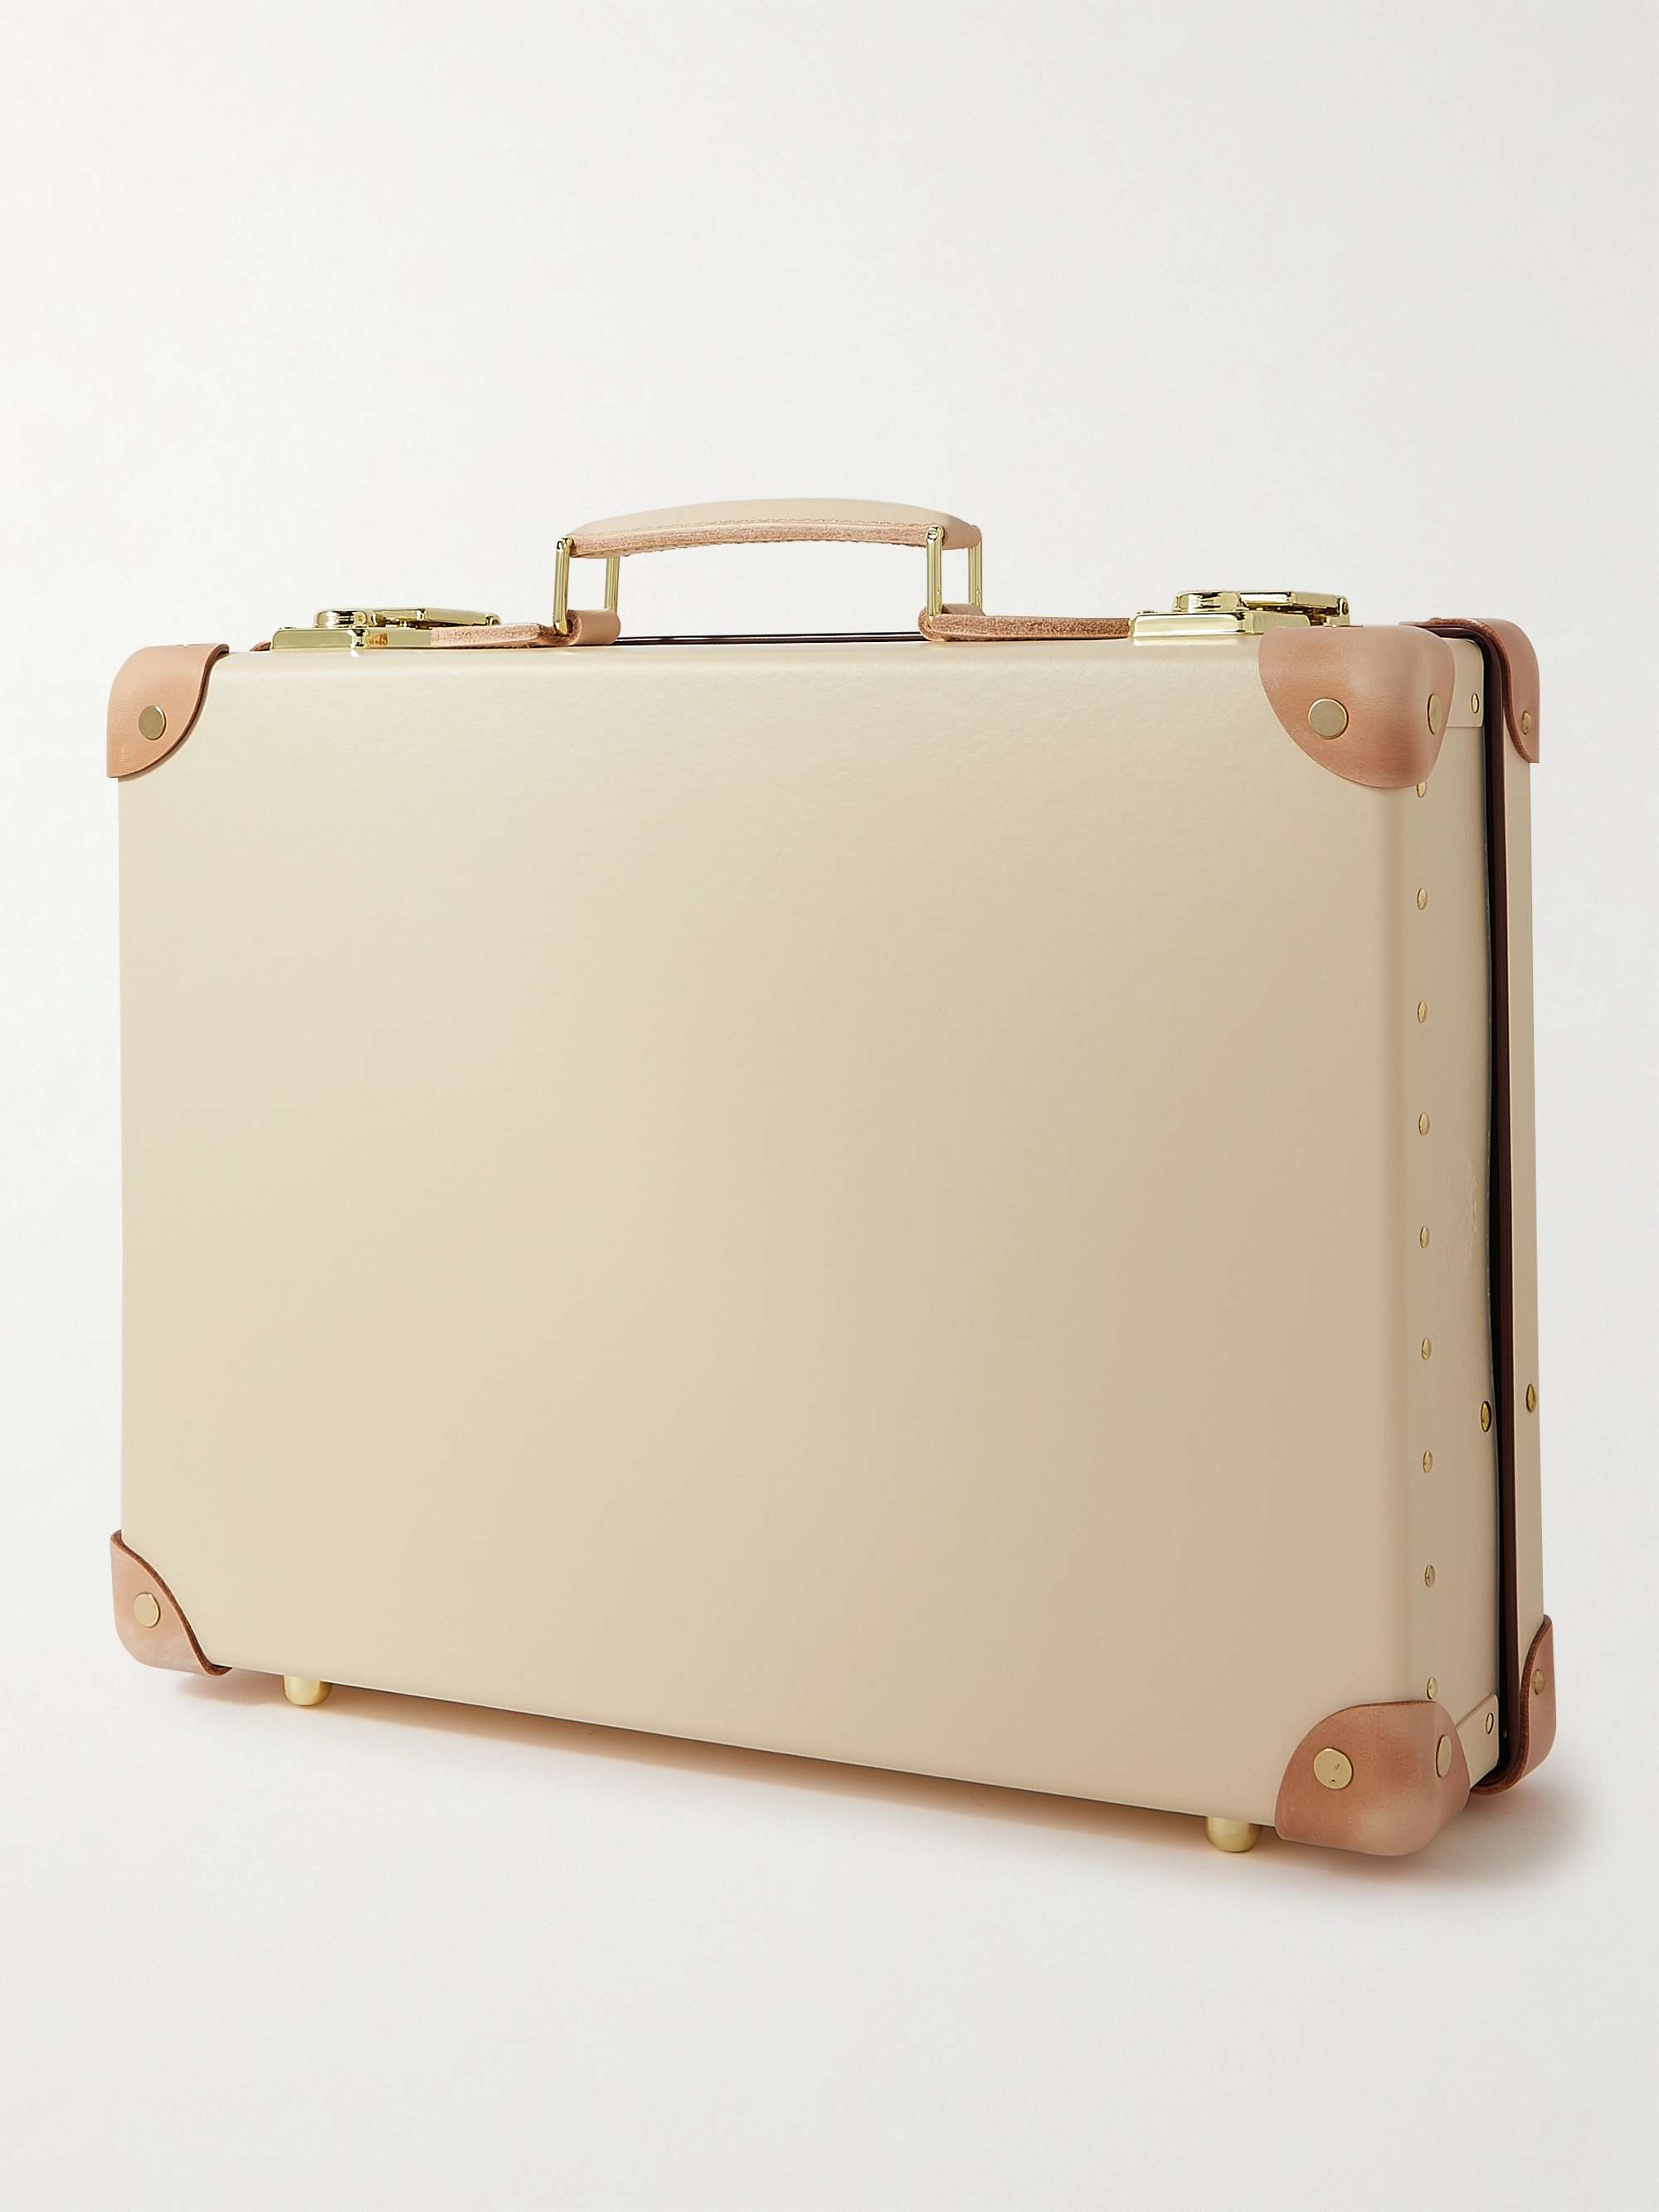 GLOBE-TROTTER Carry-On Leather-Trimmed Attaché Case